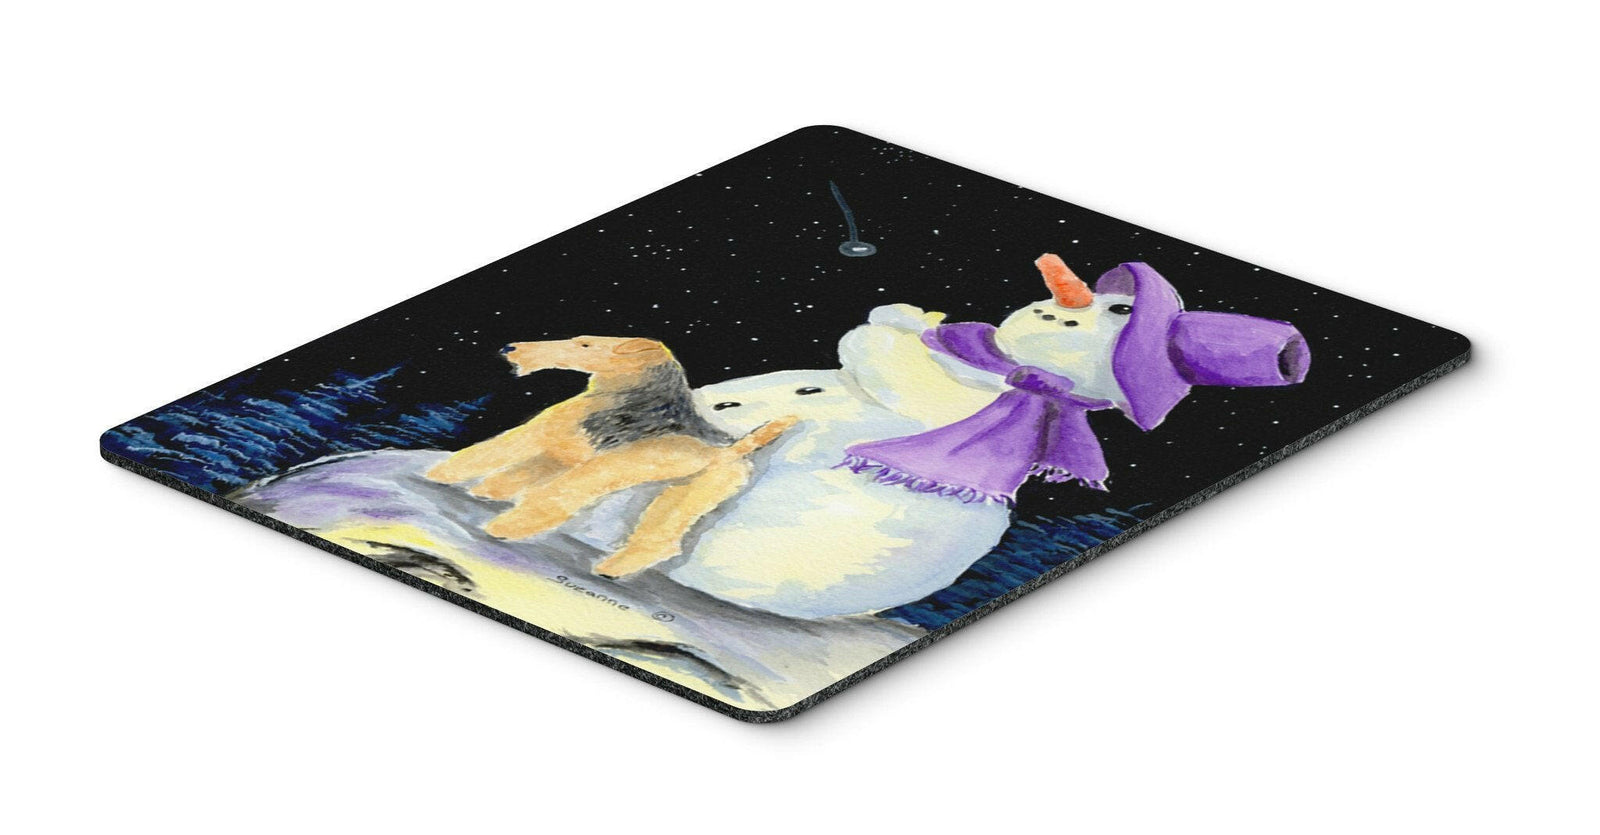 Snowman with Lakeland Terrier Mouse Pad / Hot Pad / Trivet by Caroline's Treasures